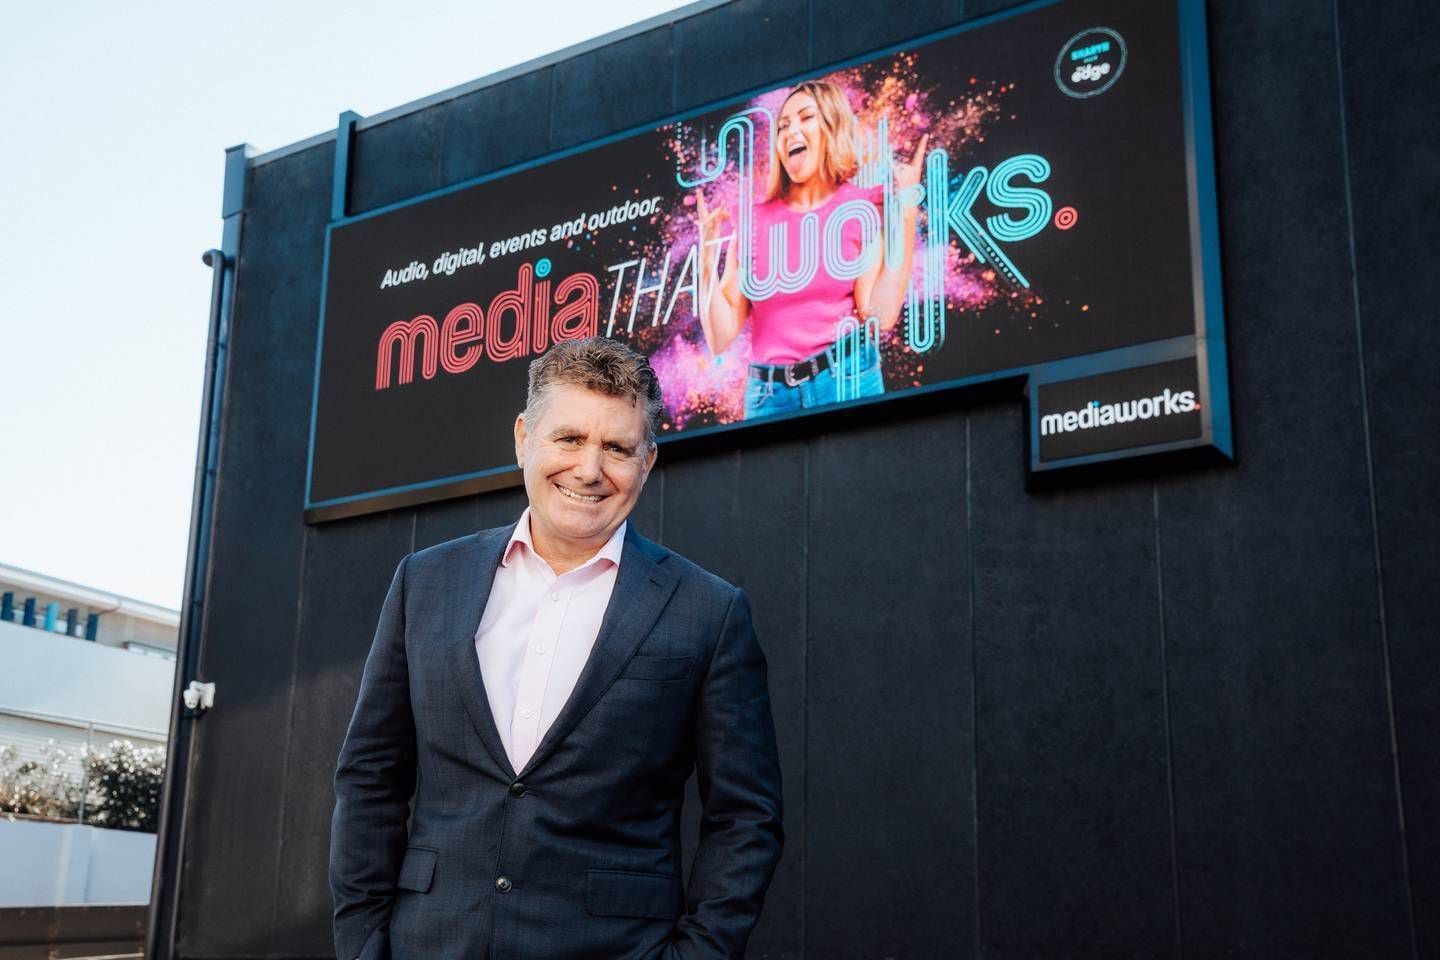 Up to 90 jobs to go at MediaWorks, staff told email NZ Herald